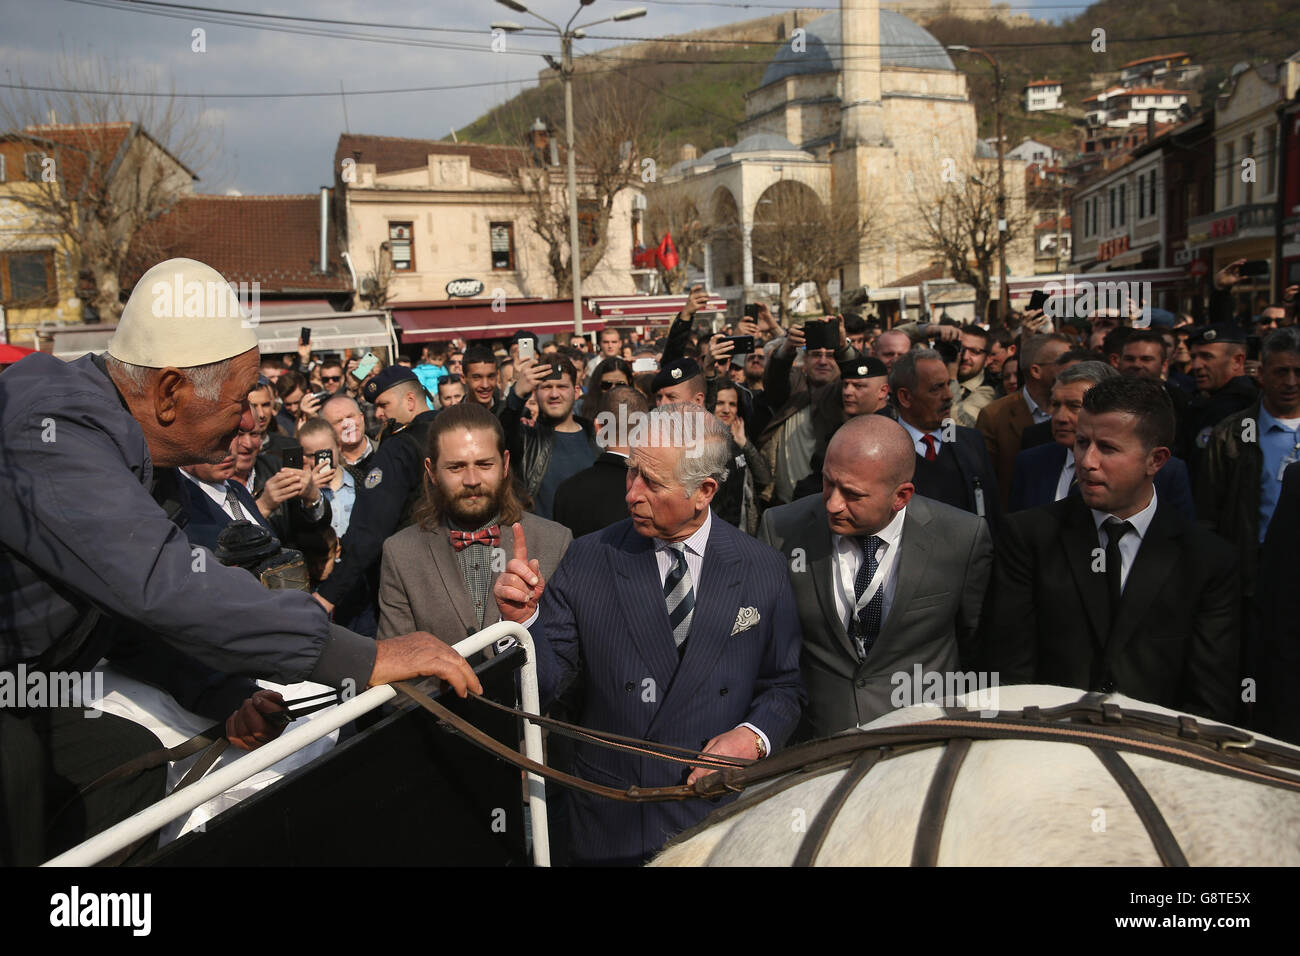 The Prince of Wales chats with the driver of a horse-drawn carriage in the old city center in Prizren, Kosovo. Stock Photo